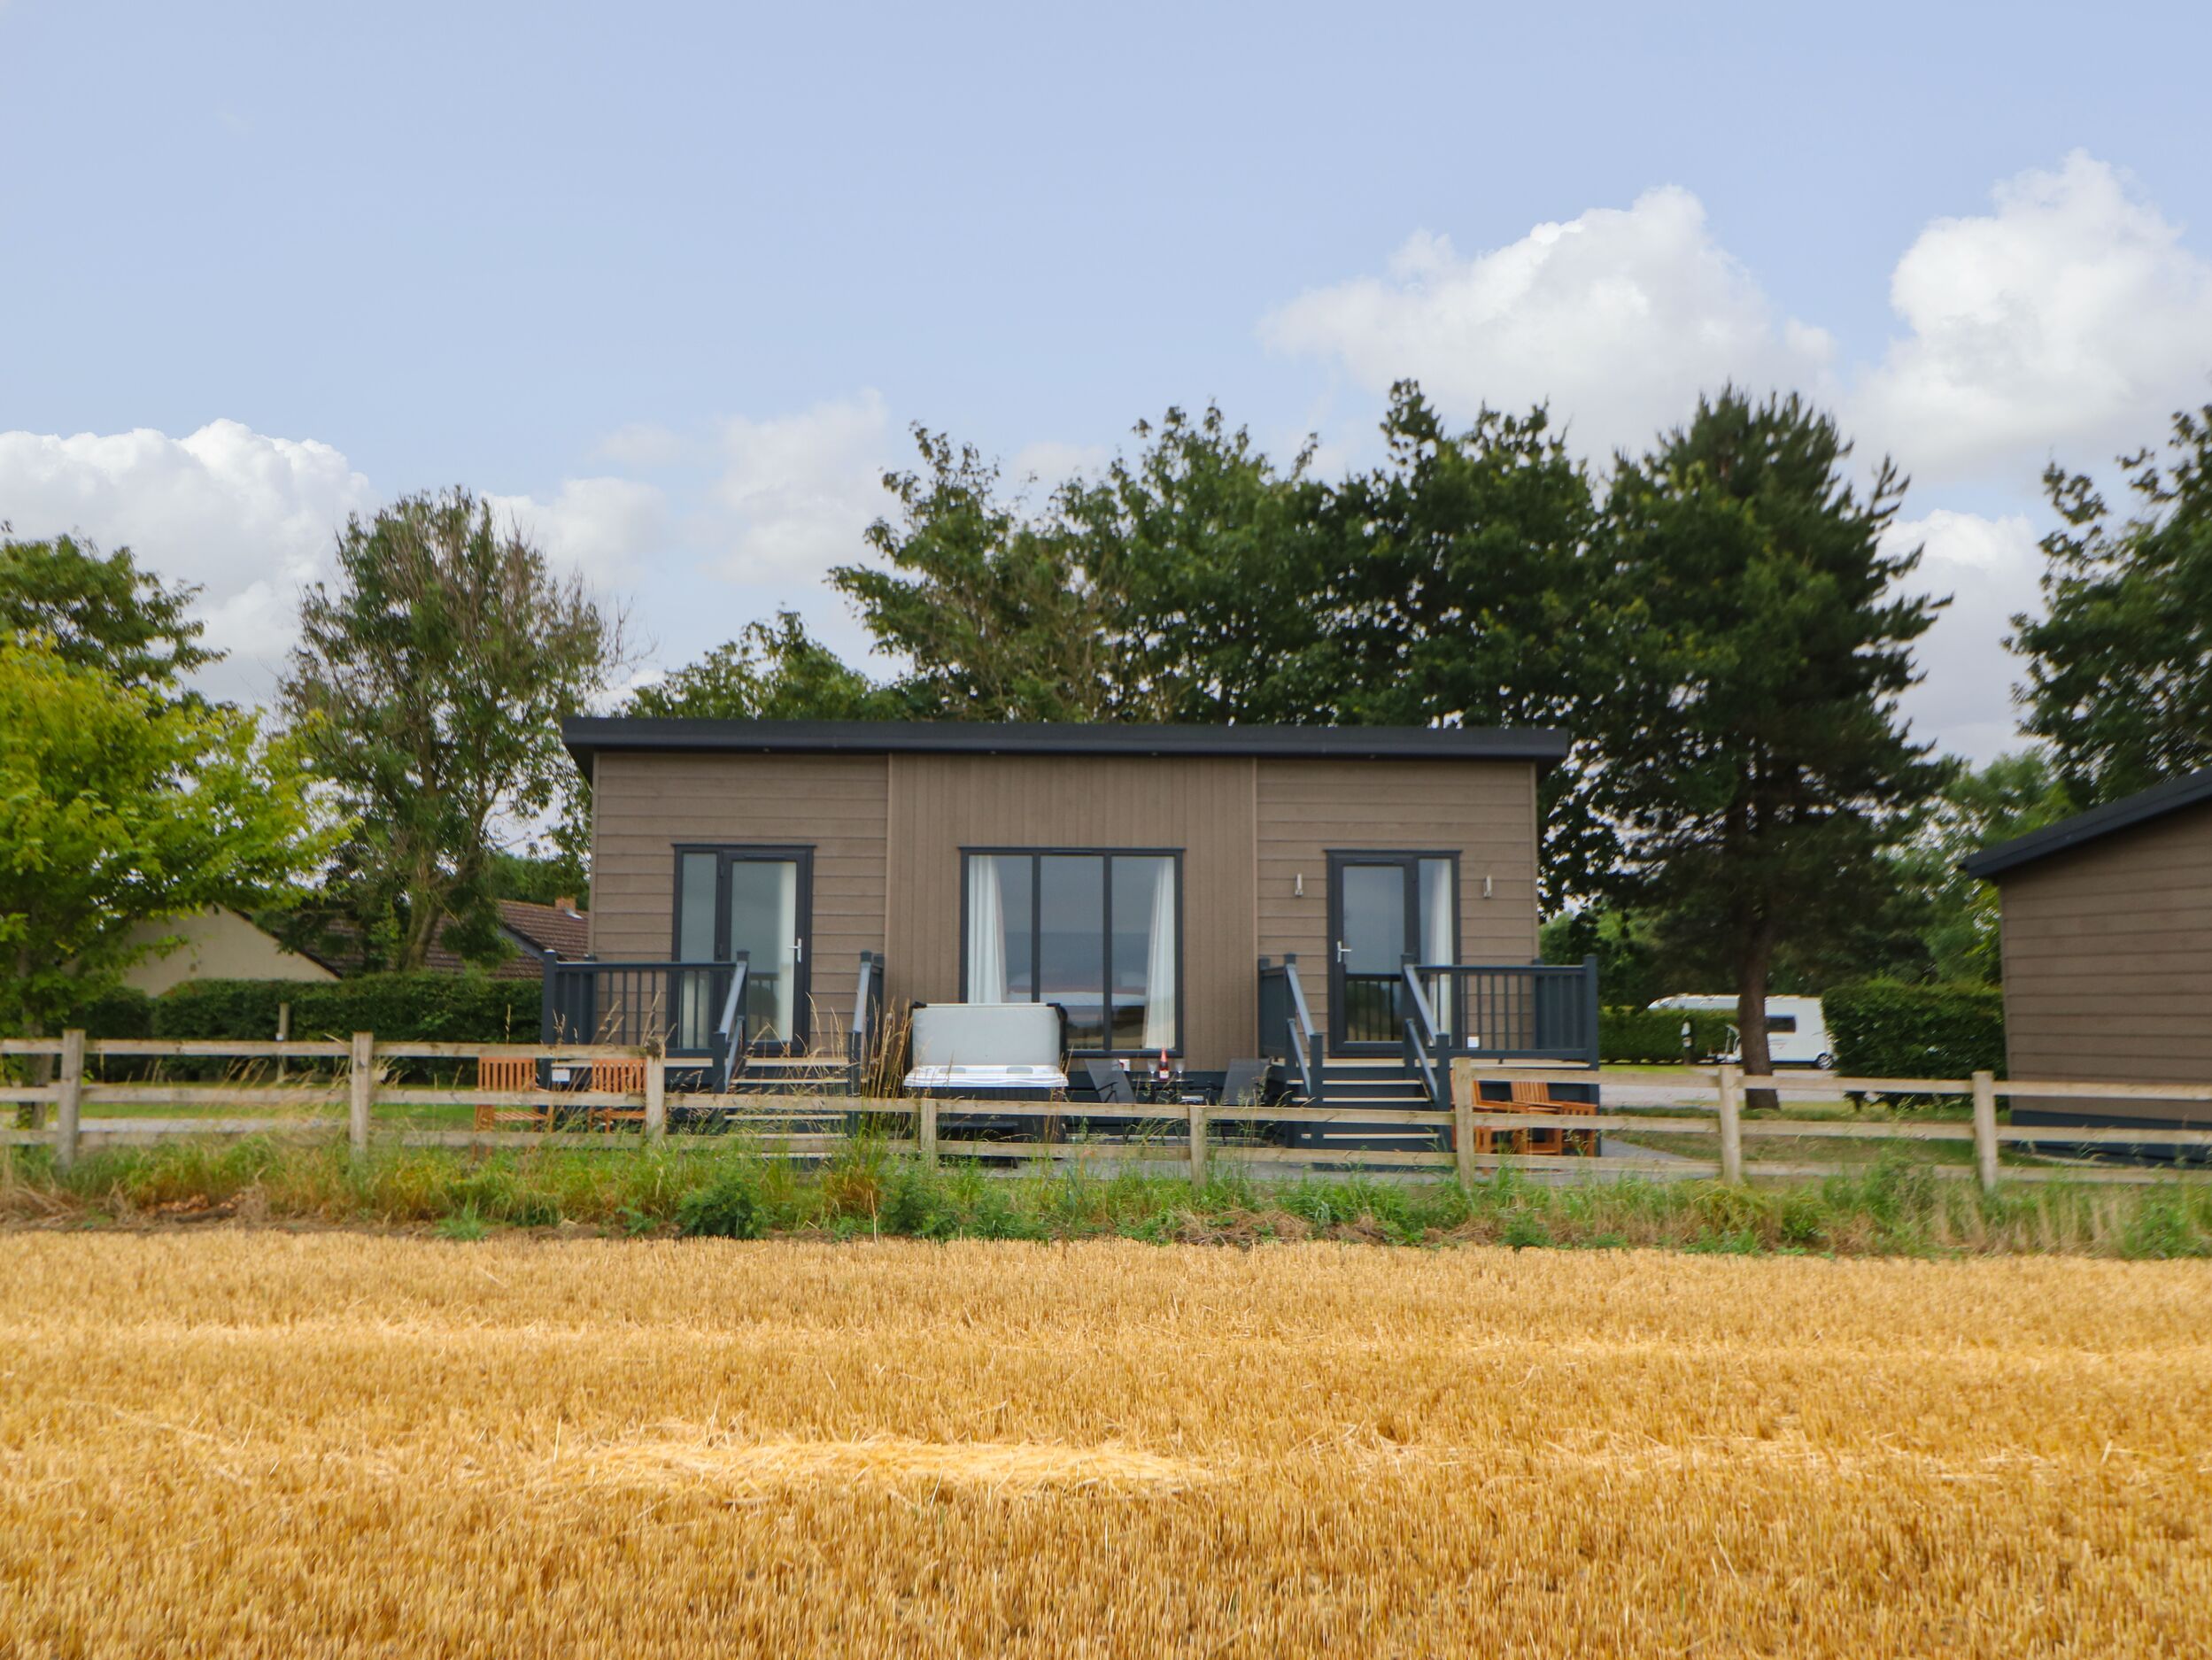 Bowes Hideaway, is near Eppleby, Durham. One-bedroom lodge, ideal for couples. Hot tub. Rural views.